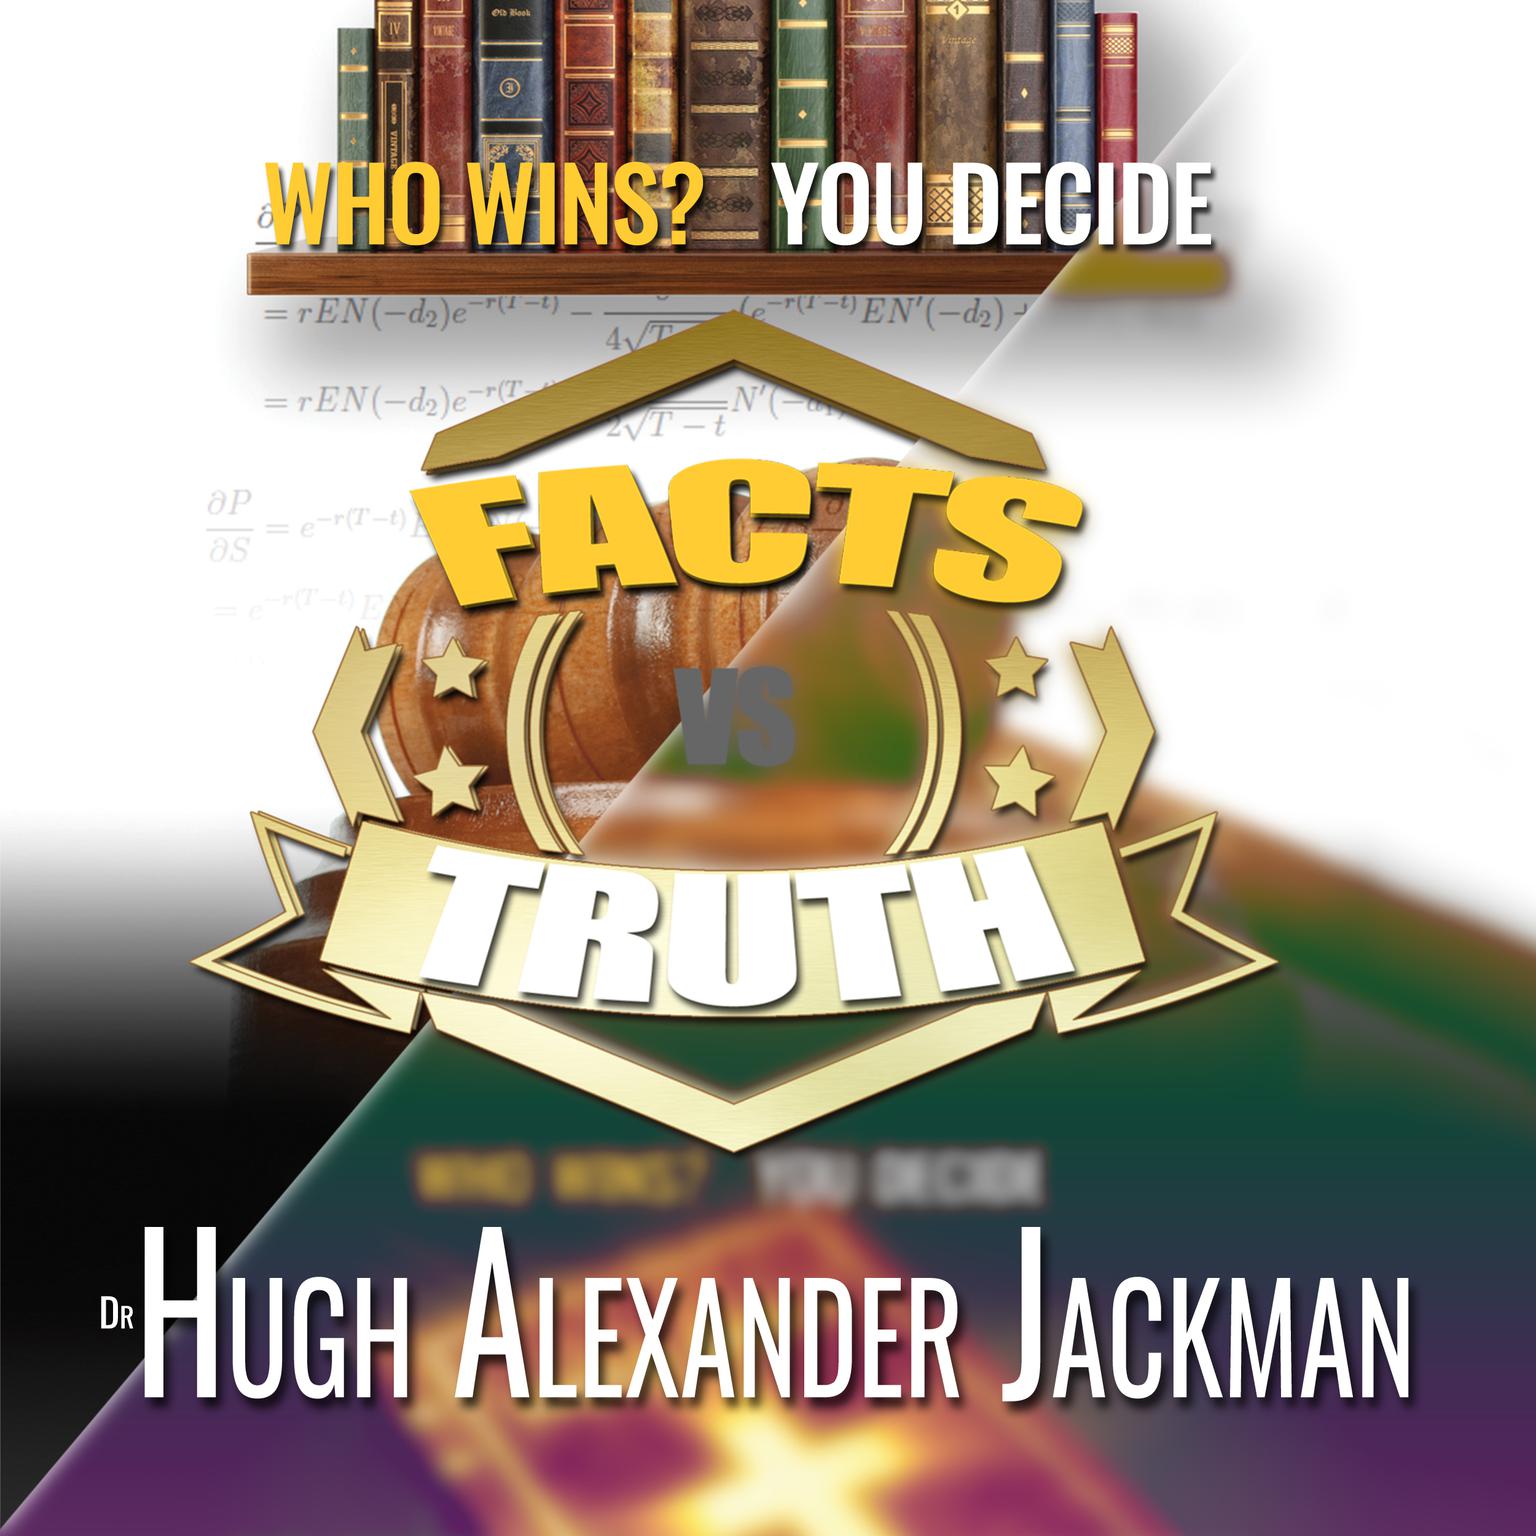 Facts Versus Truth (Abridged): Who Wins? You Decide Audiobook, by Hugh Alexander Jackman